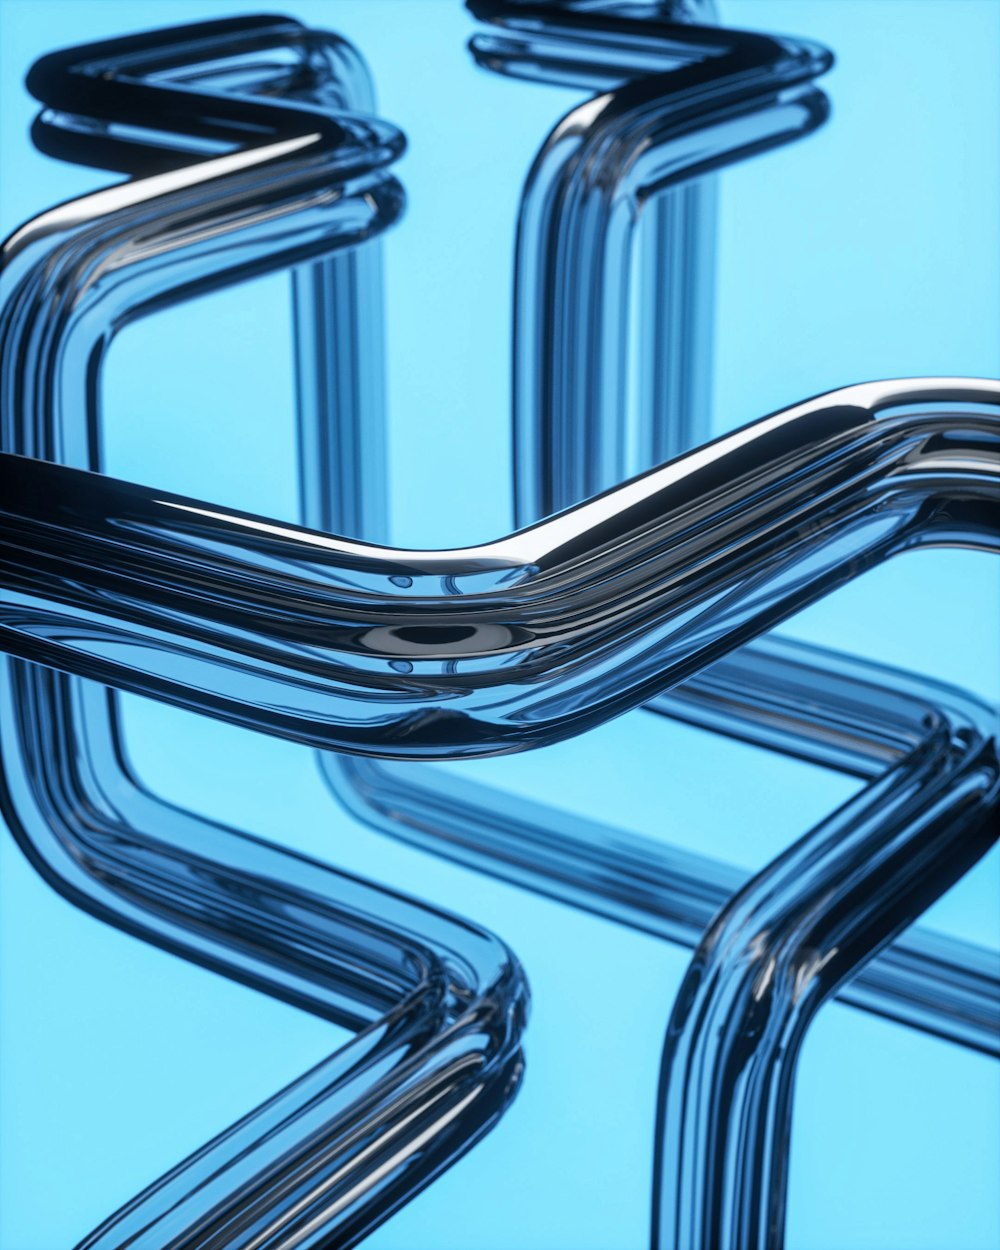 a close up of a metal object on a blue background